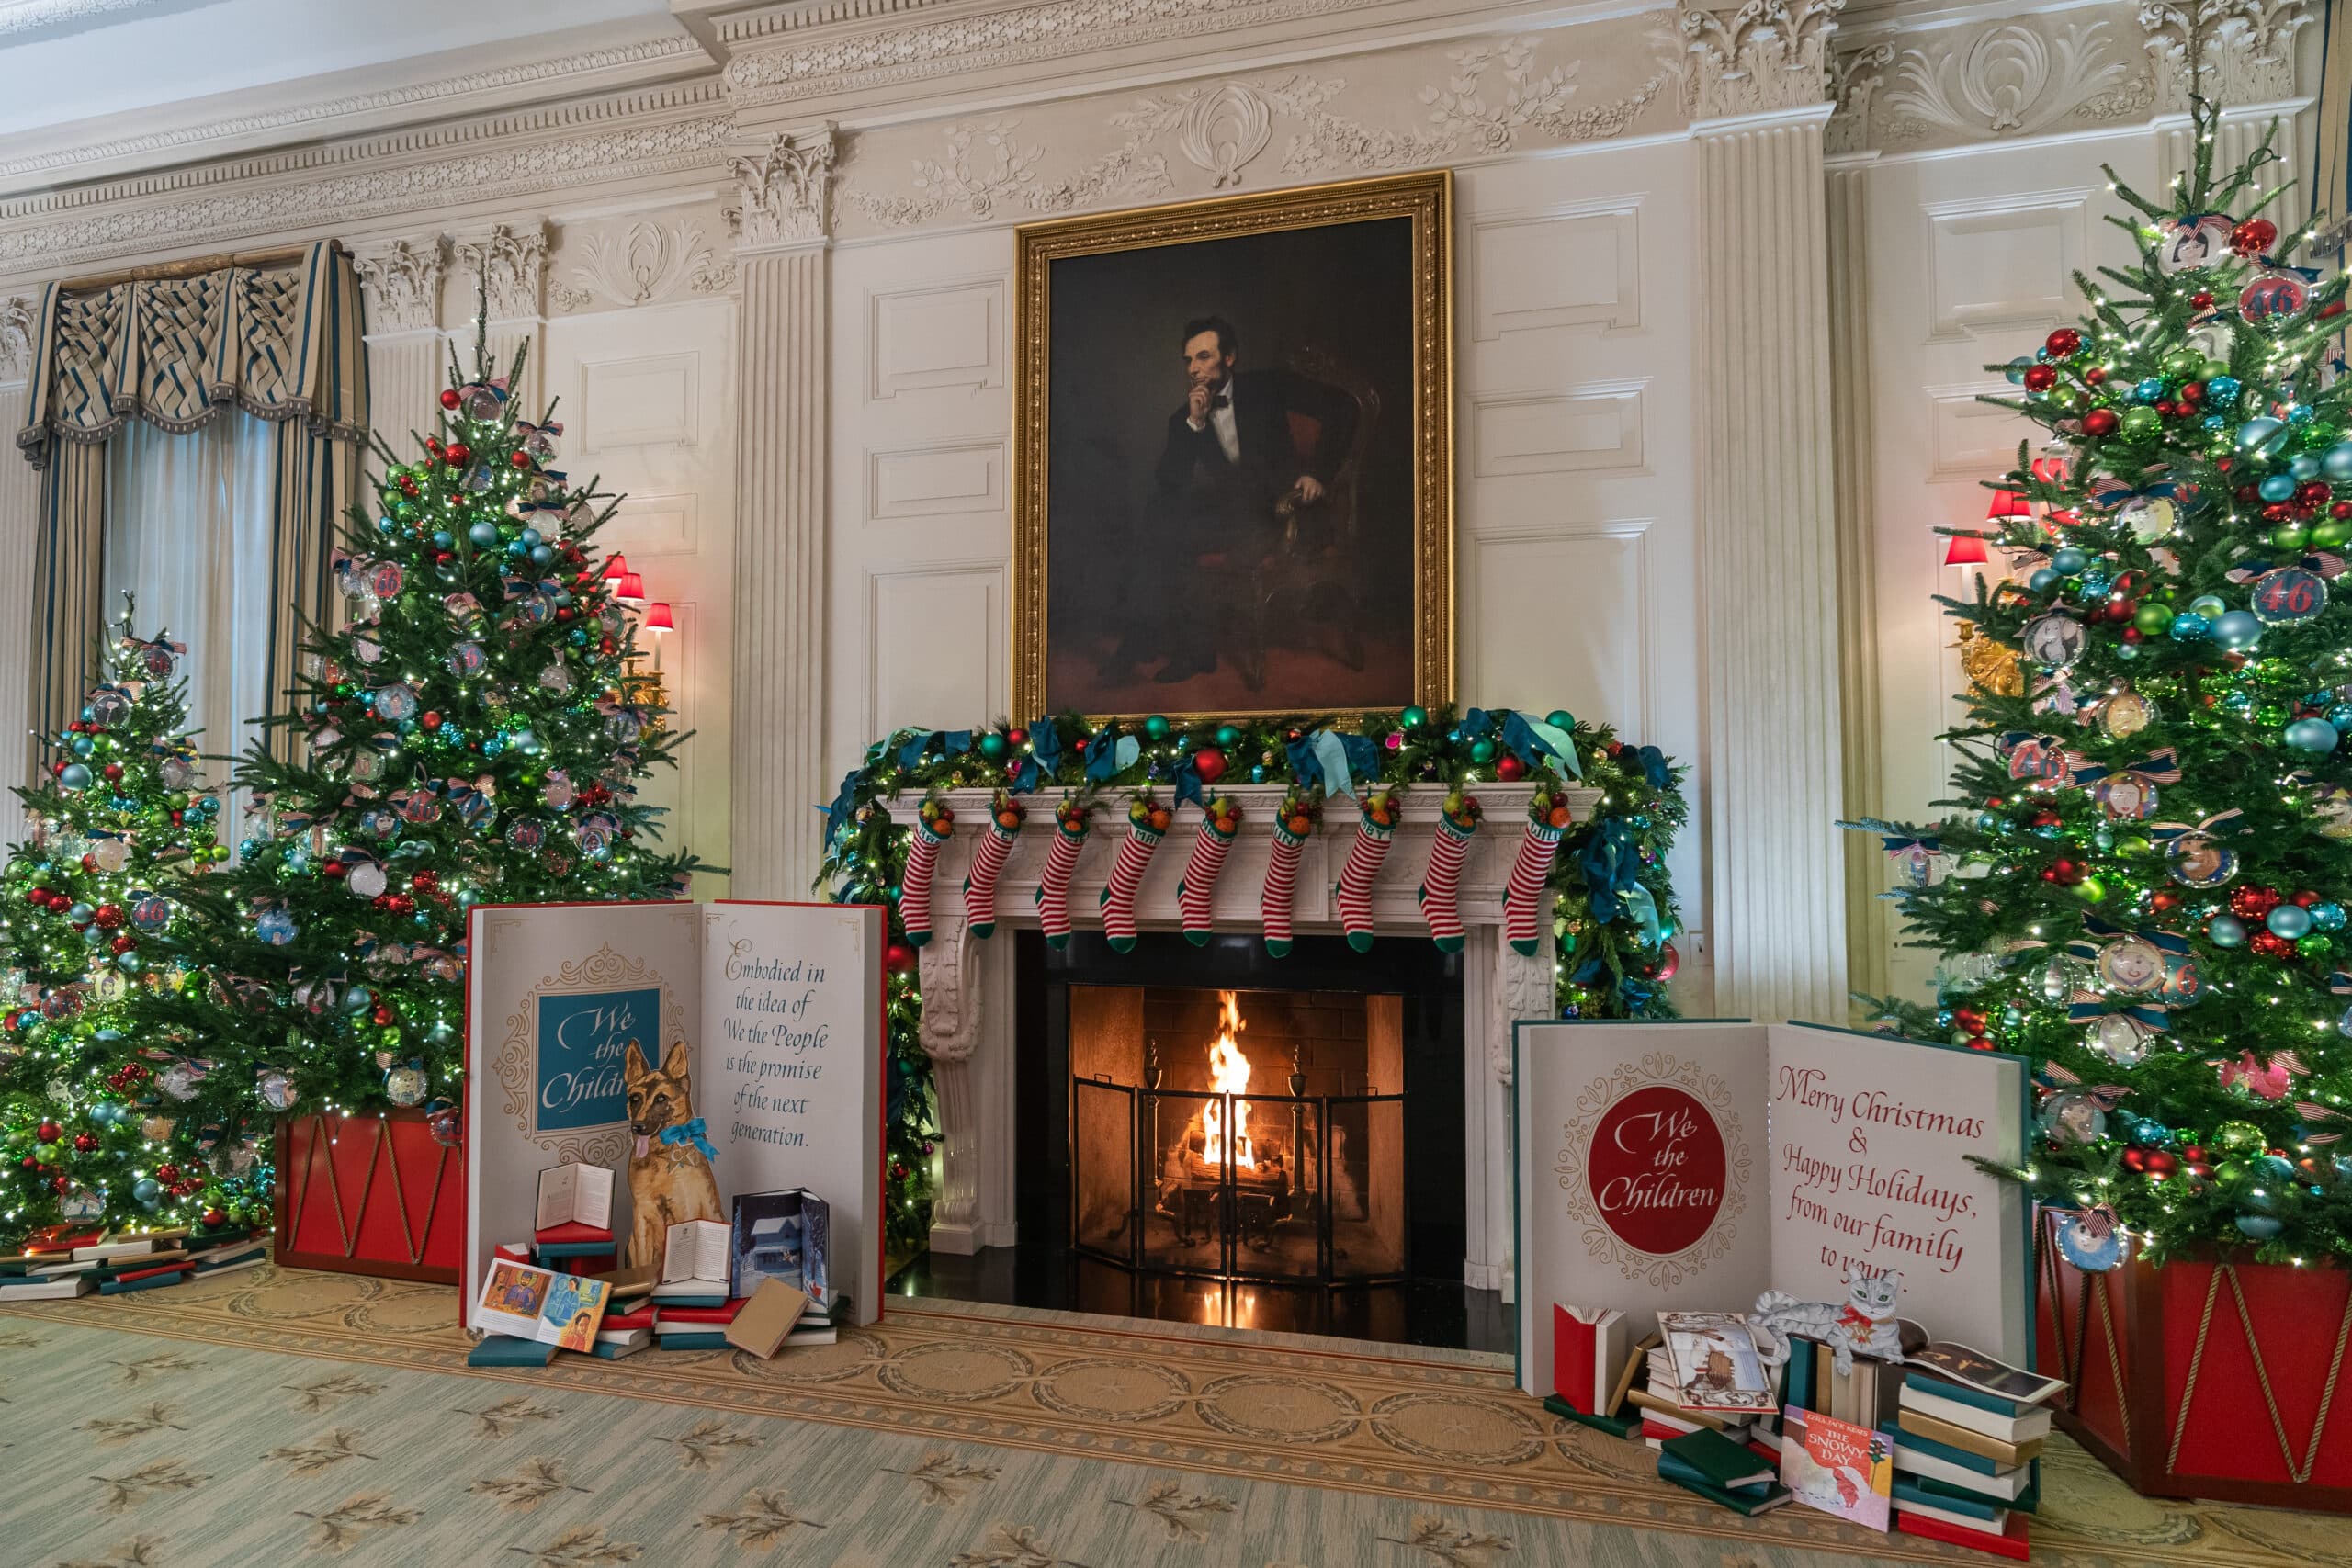 https://fabeveryday.com/wp-content/uploads/2022/12/2022-White-House-Holiday-Decorations-State-Dining-Room-3-scaled.jpg